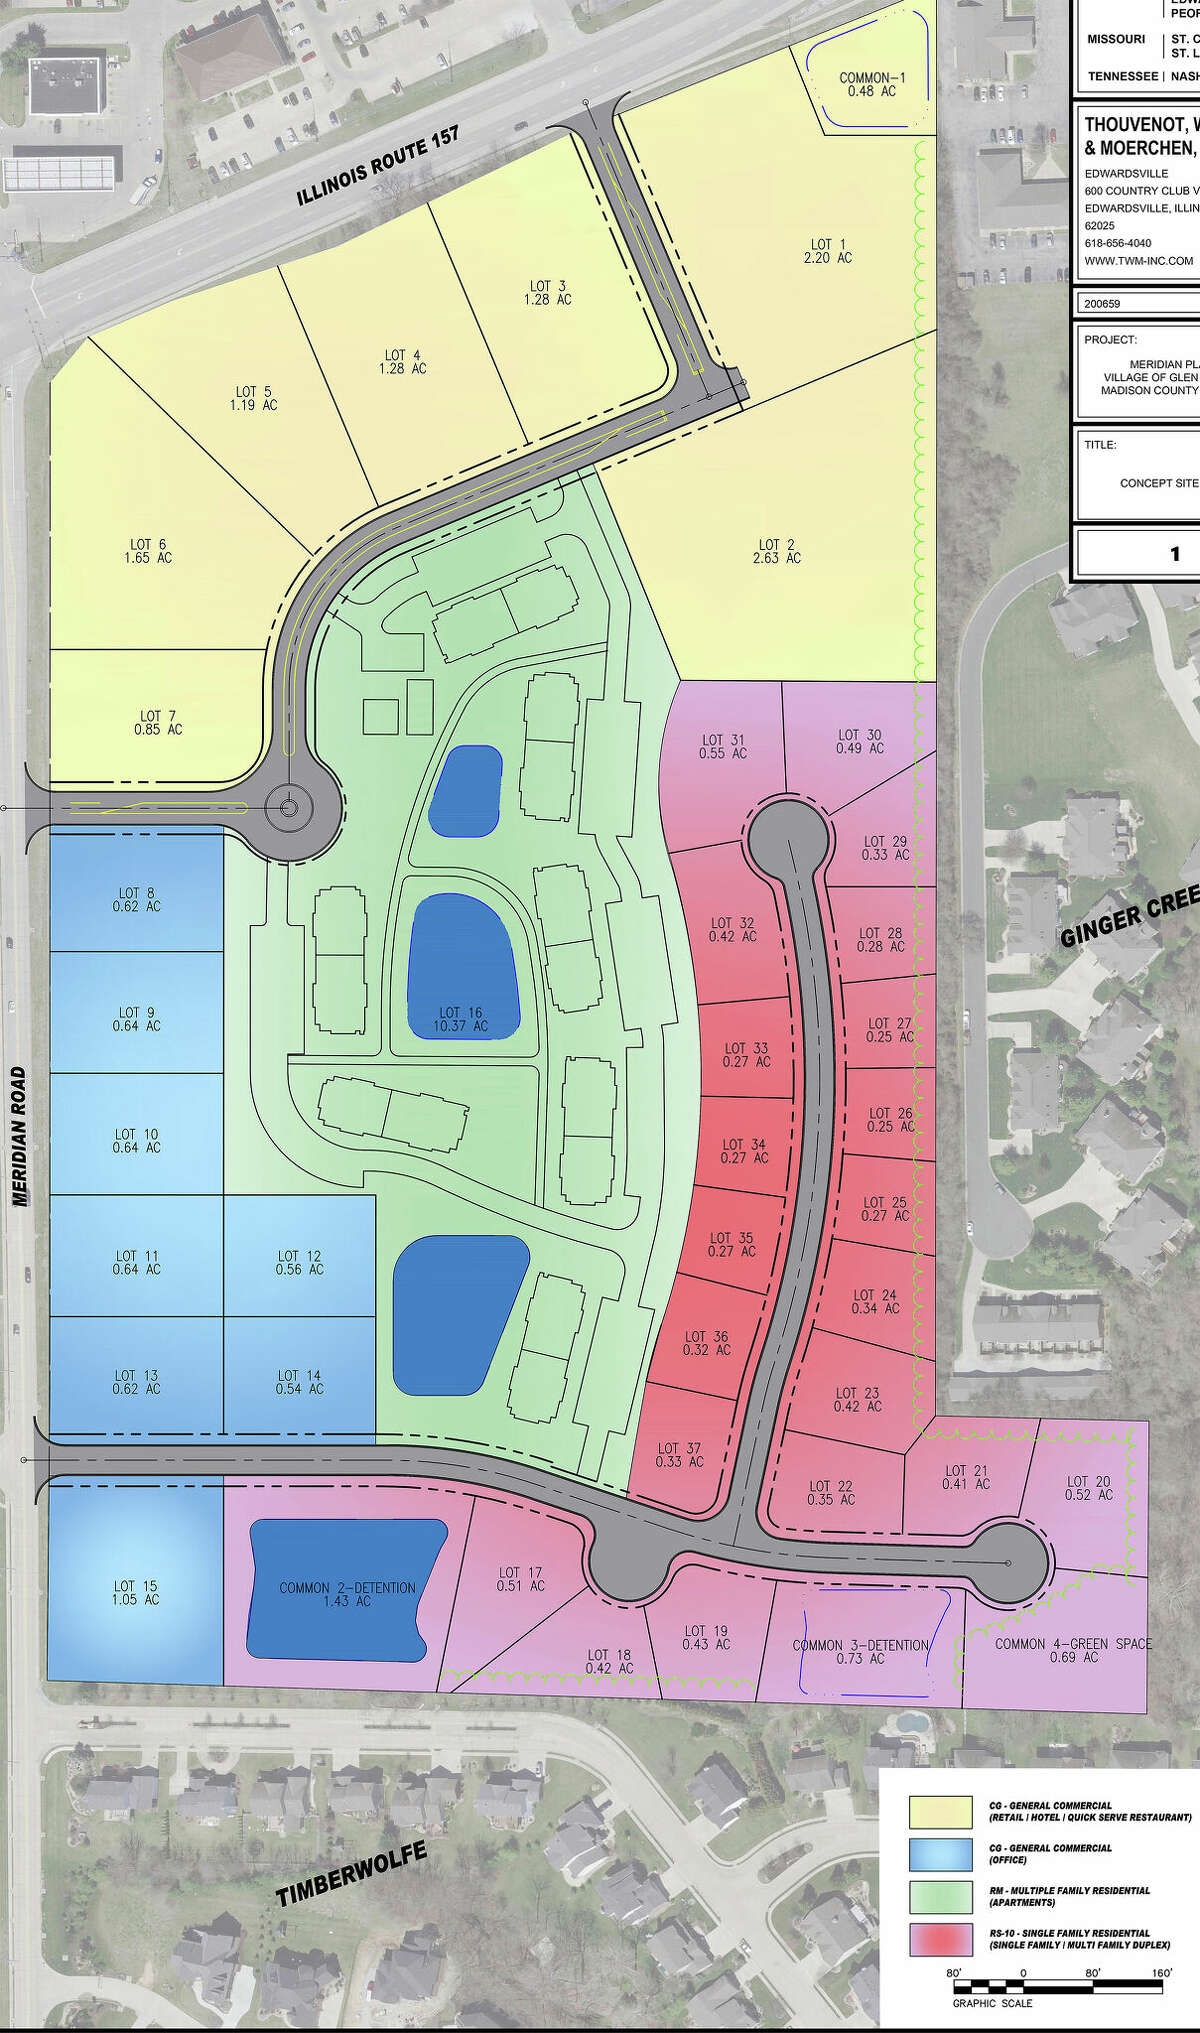 Meridian Plaza. Yellow = commercial, retail; red = attached villas; green = apartments; and blue = office/retail.